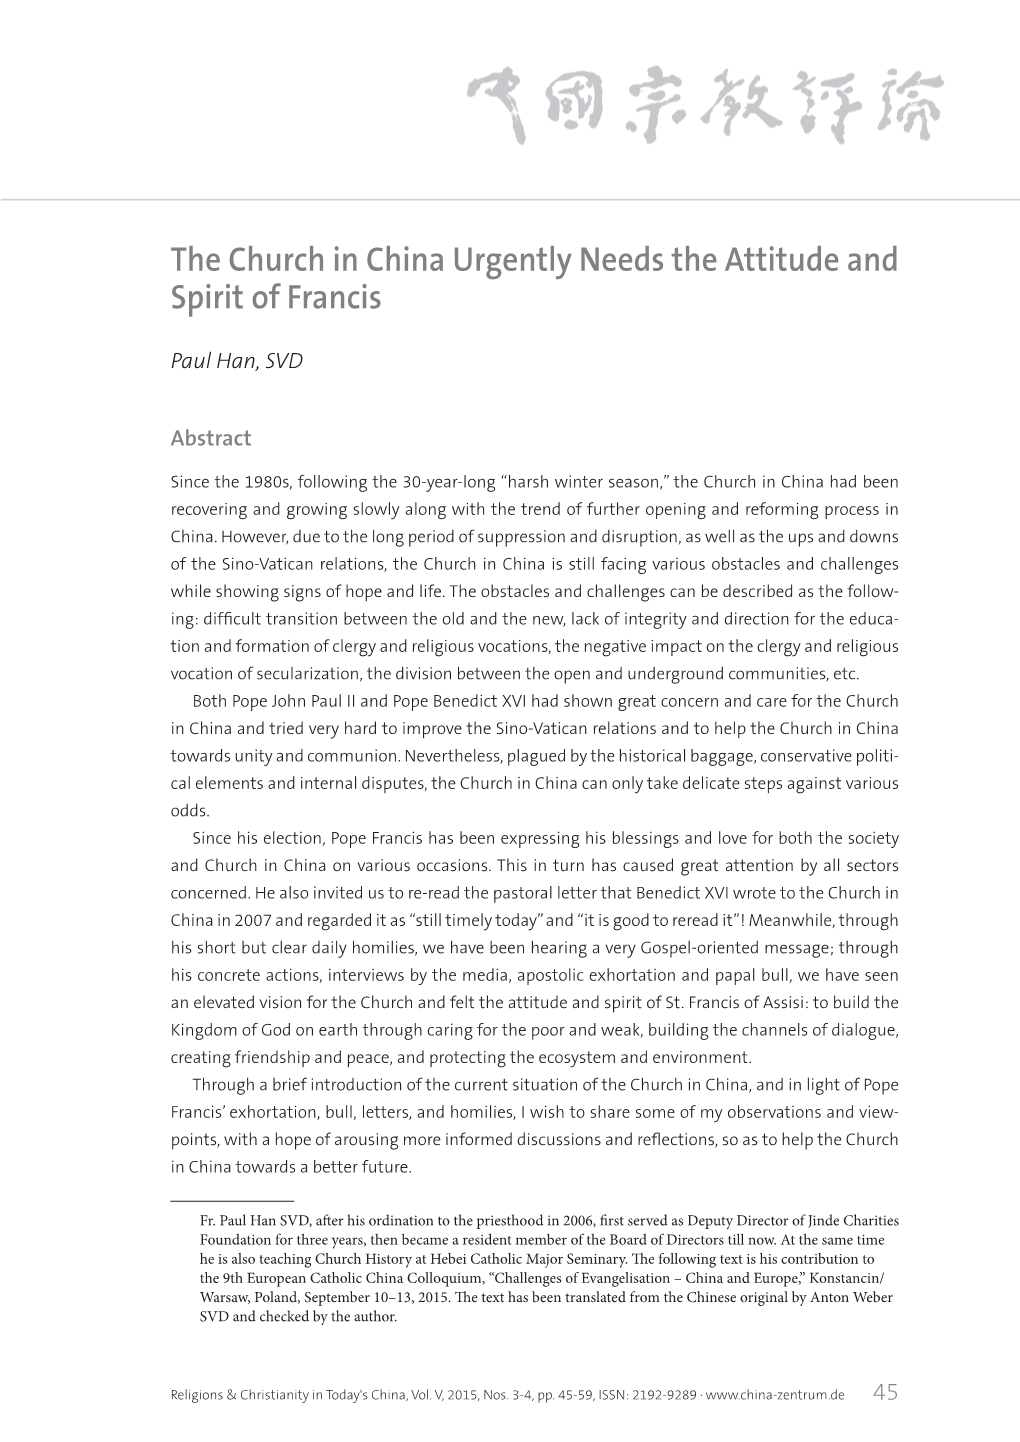 The Church in China Urgently Needs the Attitude and Spirit of Francis